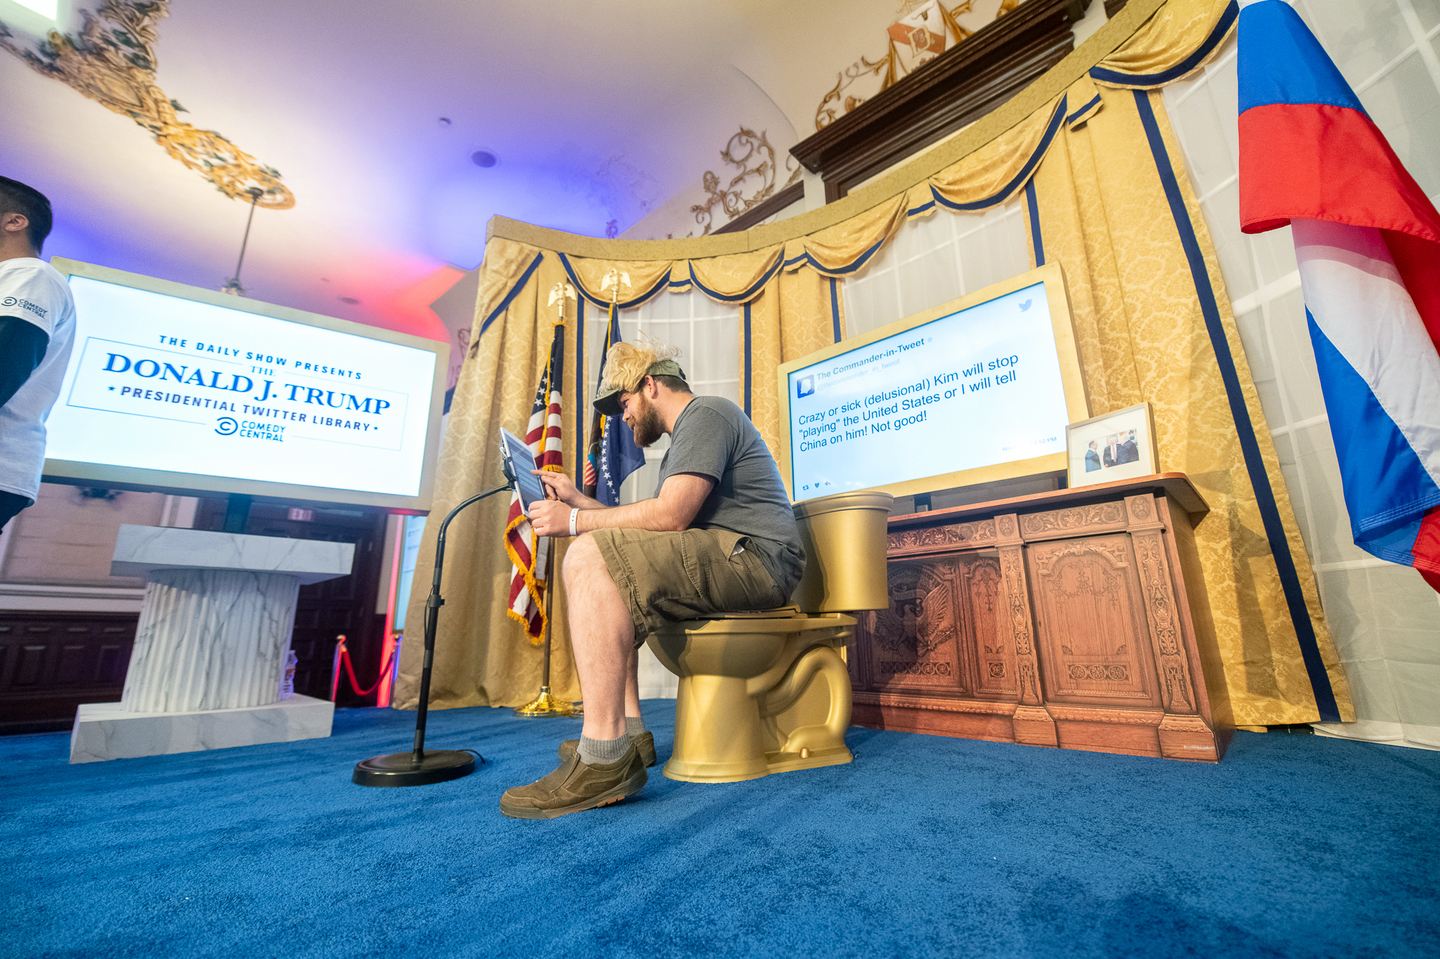 <em>The Daily Show</em> Presents the Donald J Trump Presidential Twitter Library at SXSW, 2019